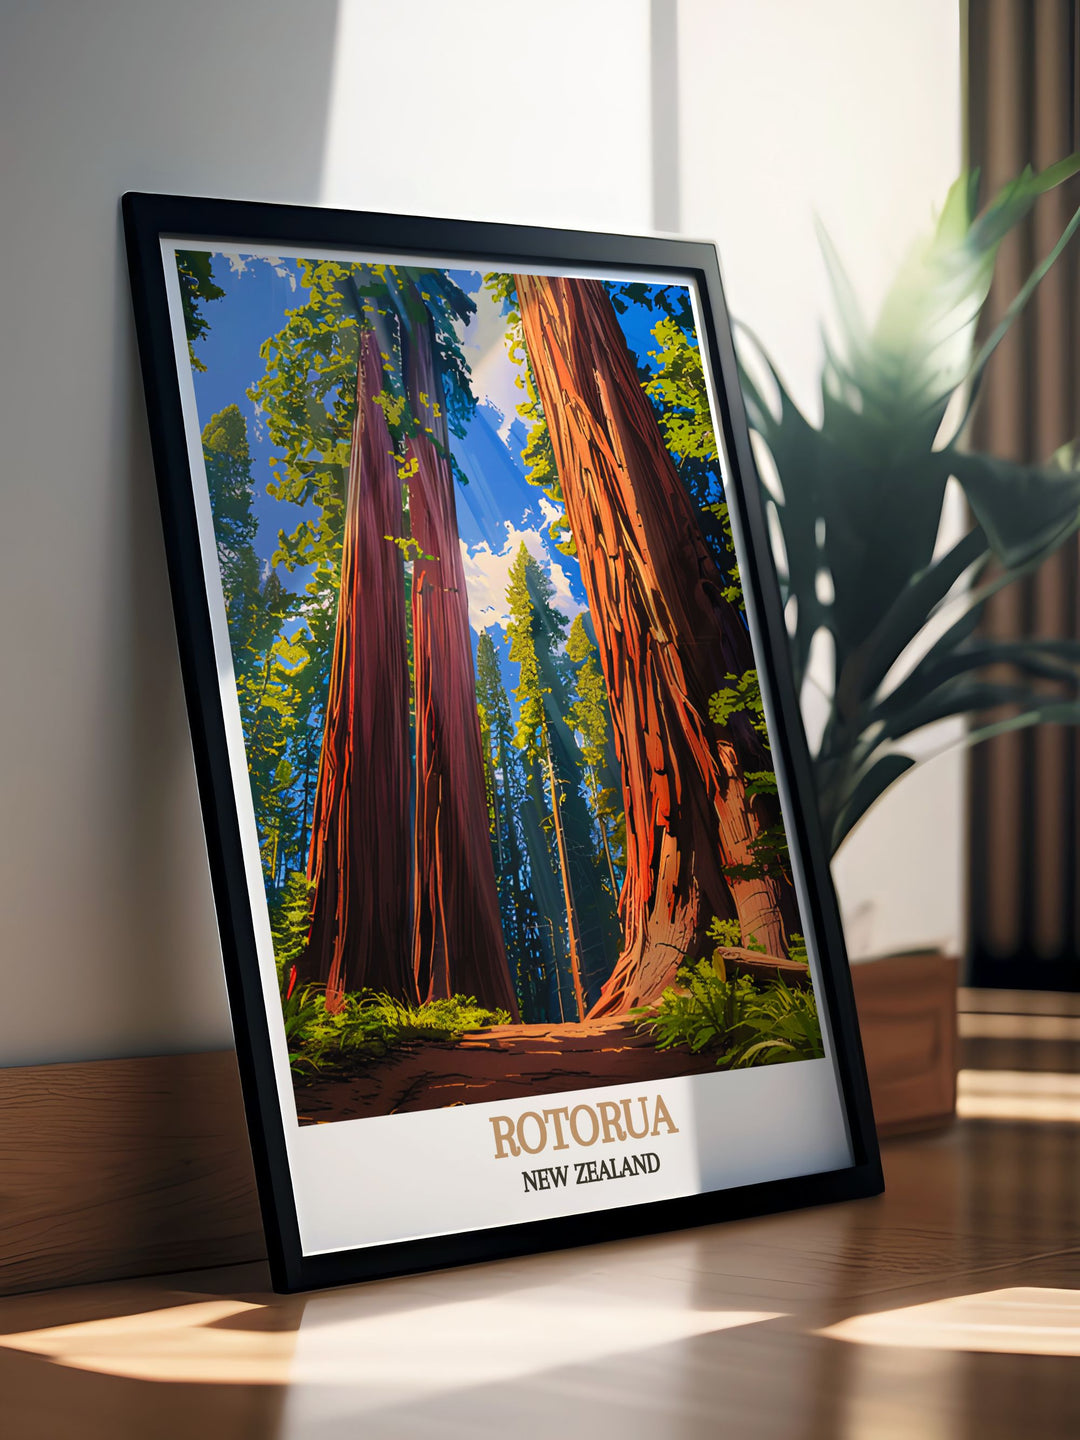 Unique Redwoods Forest artwork capturing the essence of Rotorua New Zealand. Perfect for home decor and as a special gift. This print will add a touch of elegance and tranquility to any room with its stunning depiction of the Redwoods Forest.